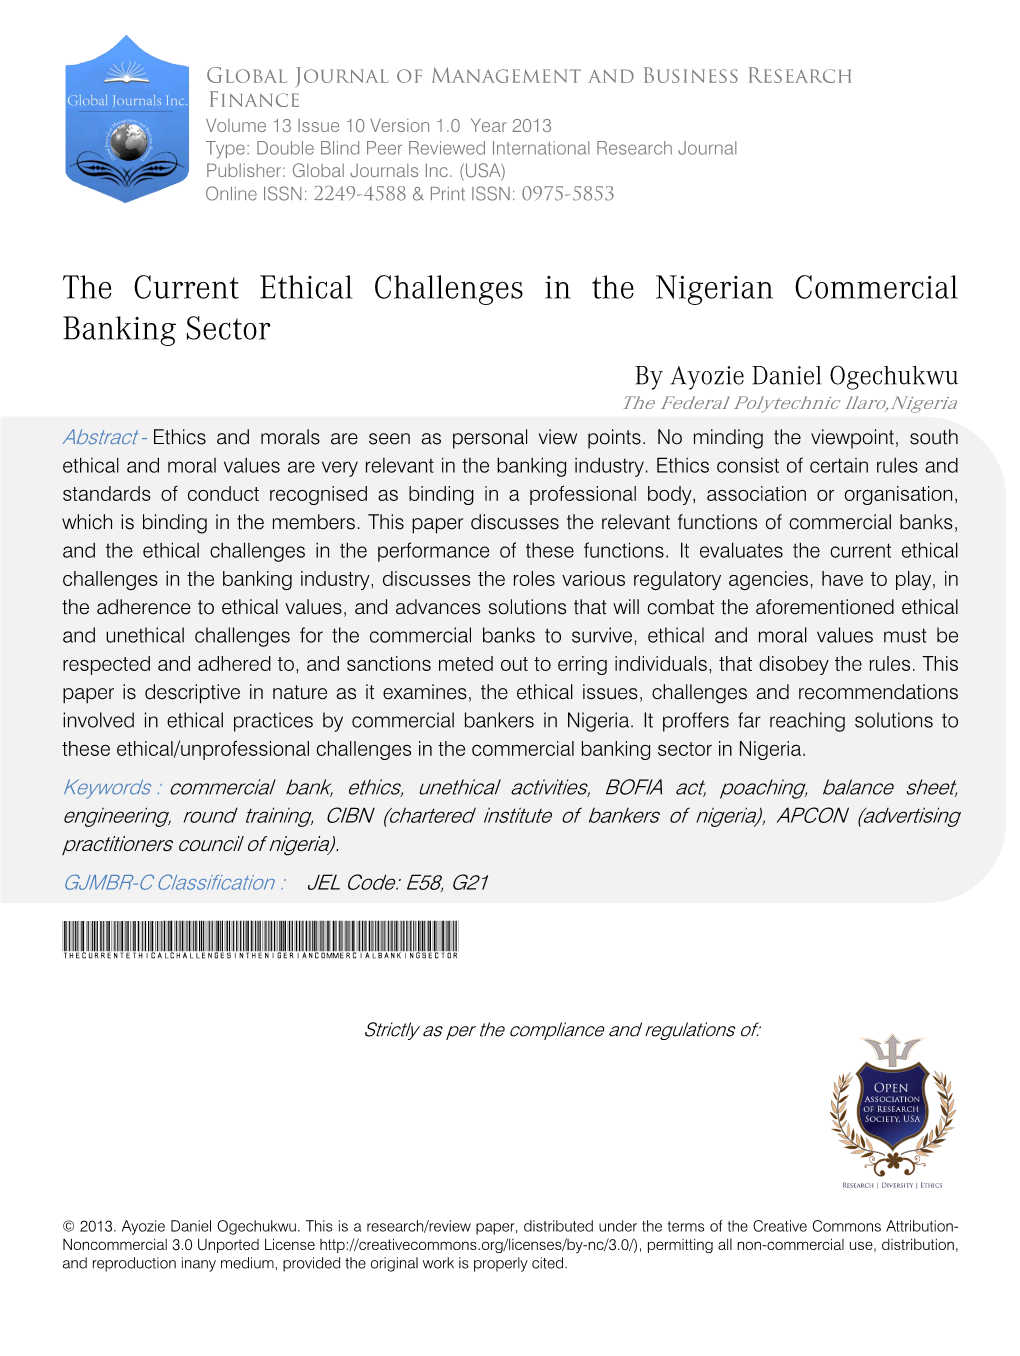 The Current Ethical Challenges in the Nigerian Commercial Banking Sector